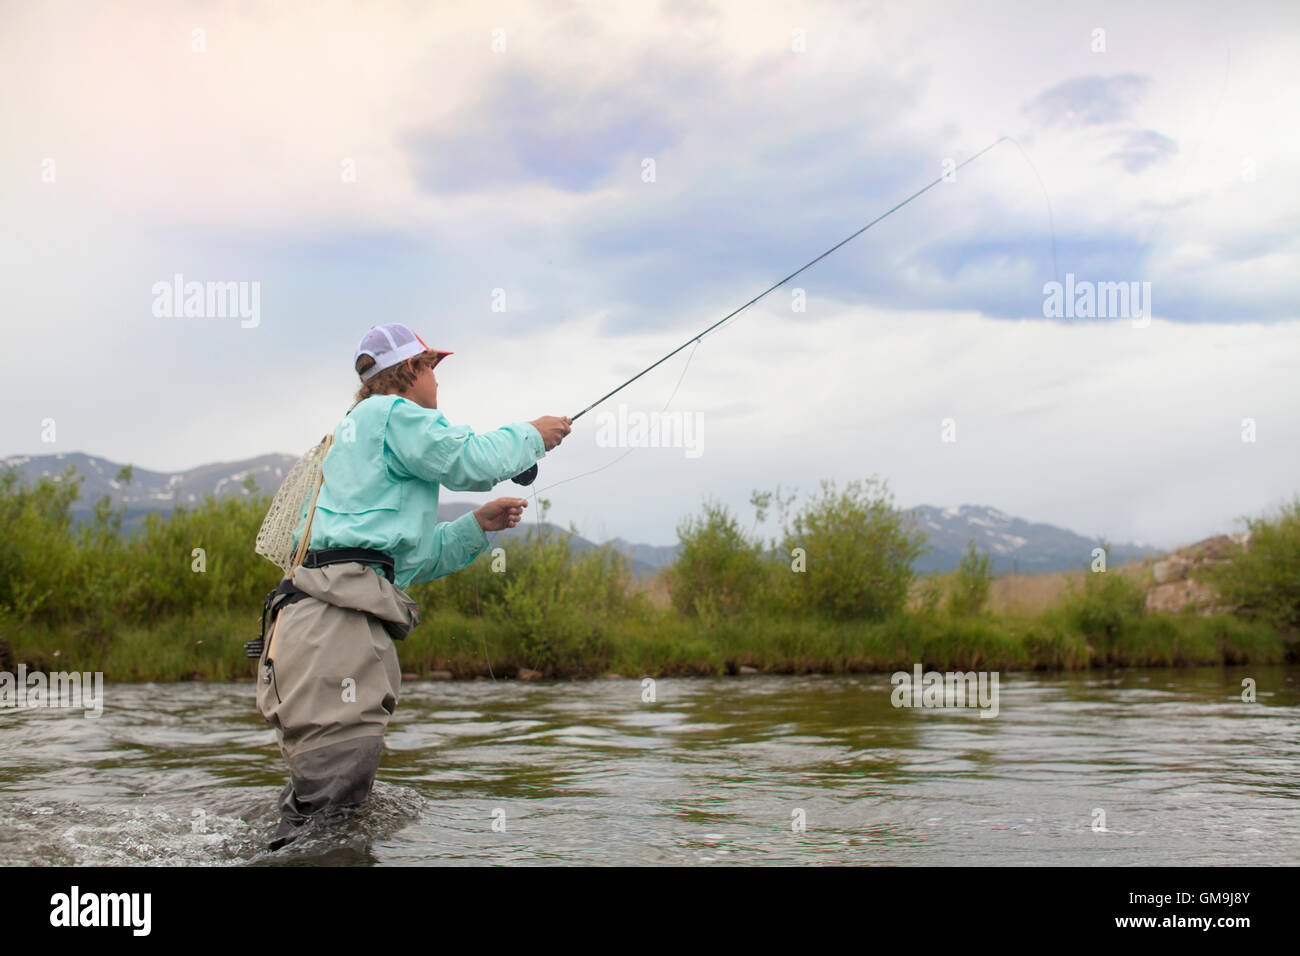 Colorado, Mid adult man wading and fishing in river Stock Photo